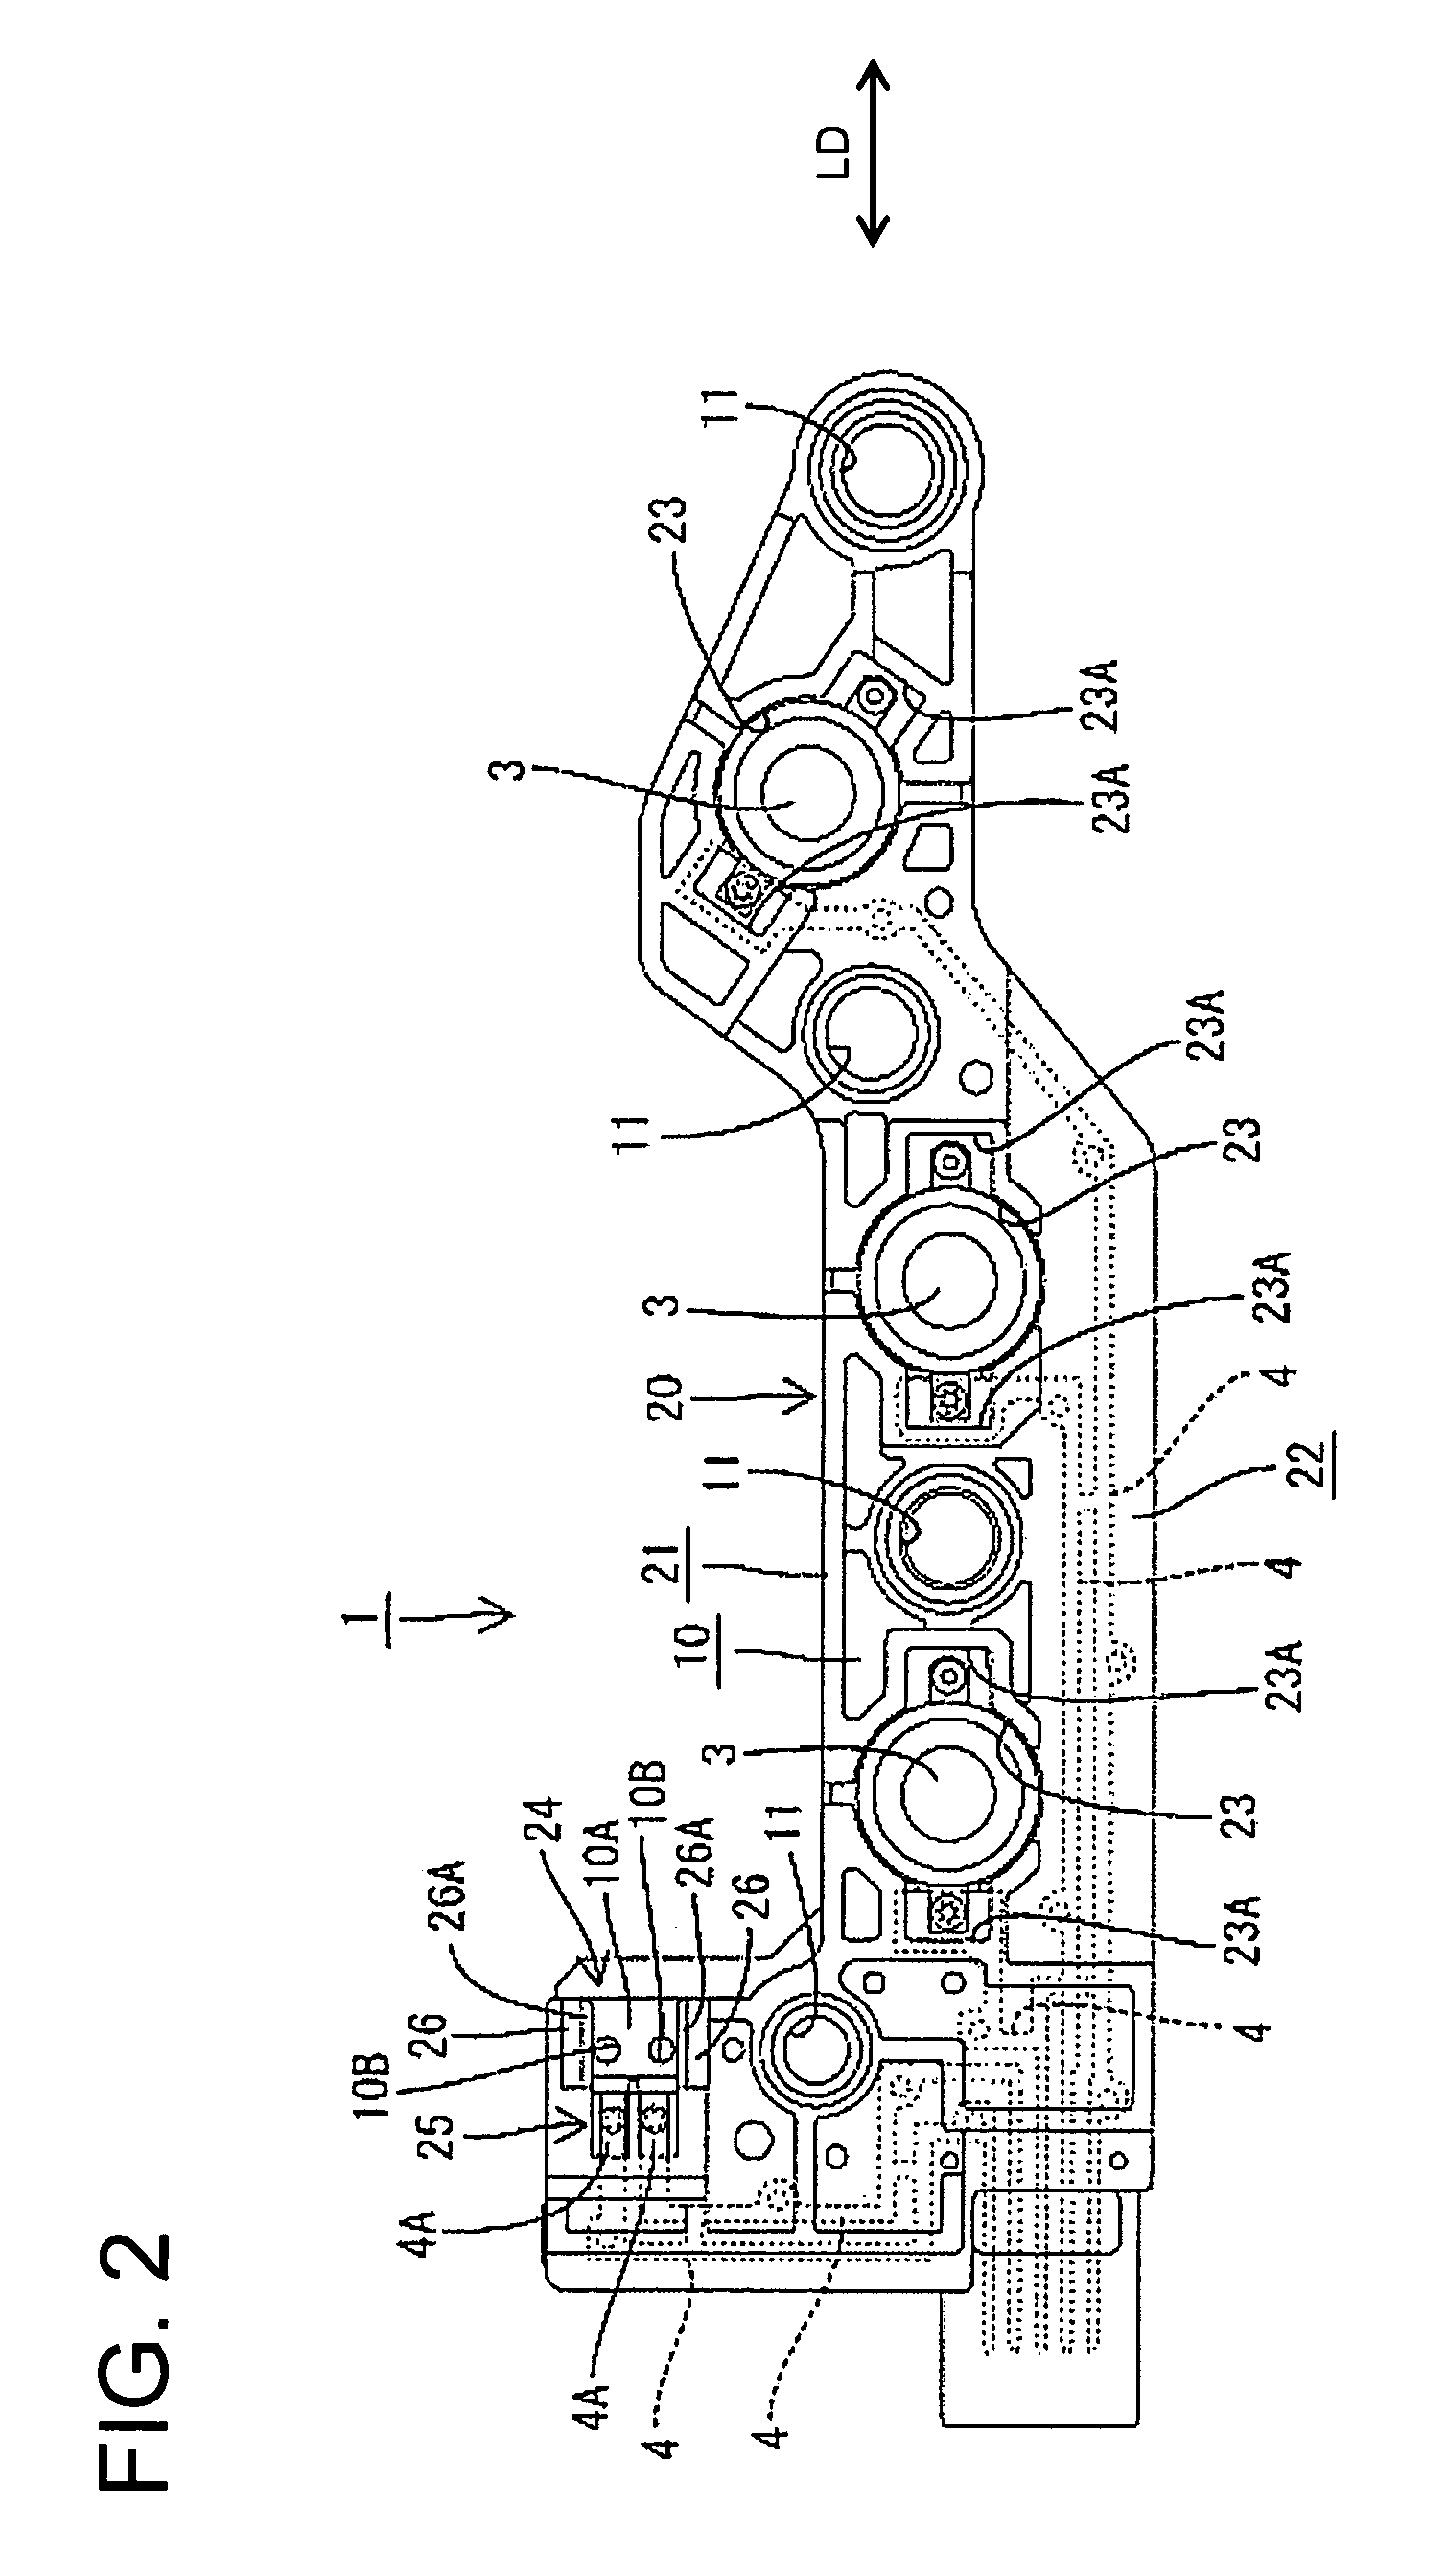 Resin molded component fitted with a metal plate and molding method therefor